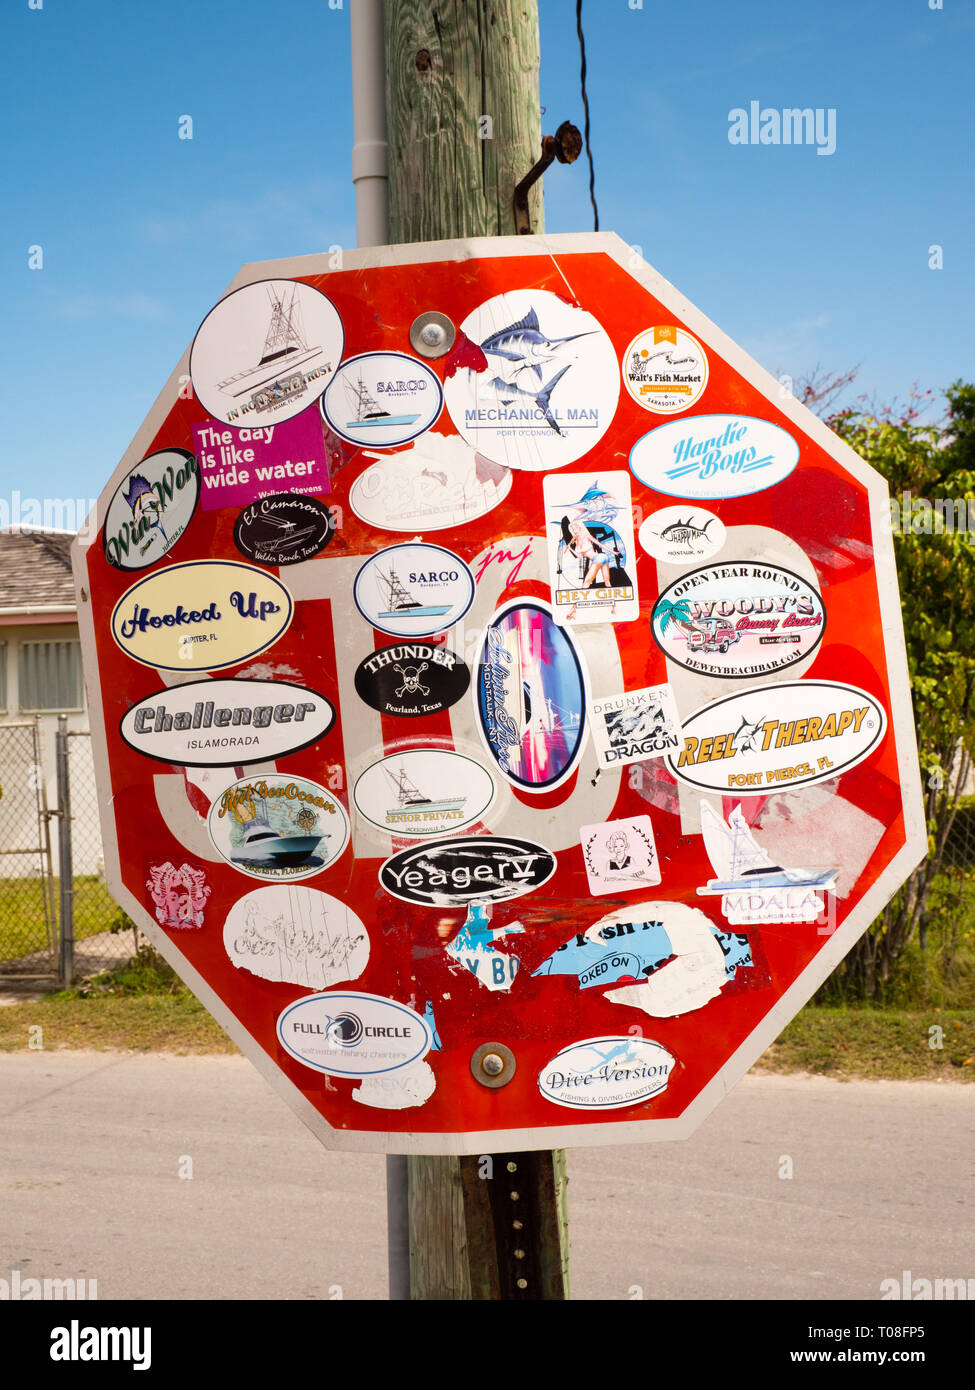 Authentic Travel Experience, Stop road Sign covered with Stickers, Dunmore Town, Harbour Island, Eleuthera, The Bahamas. Stock Photo